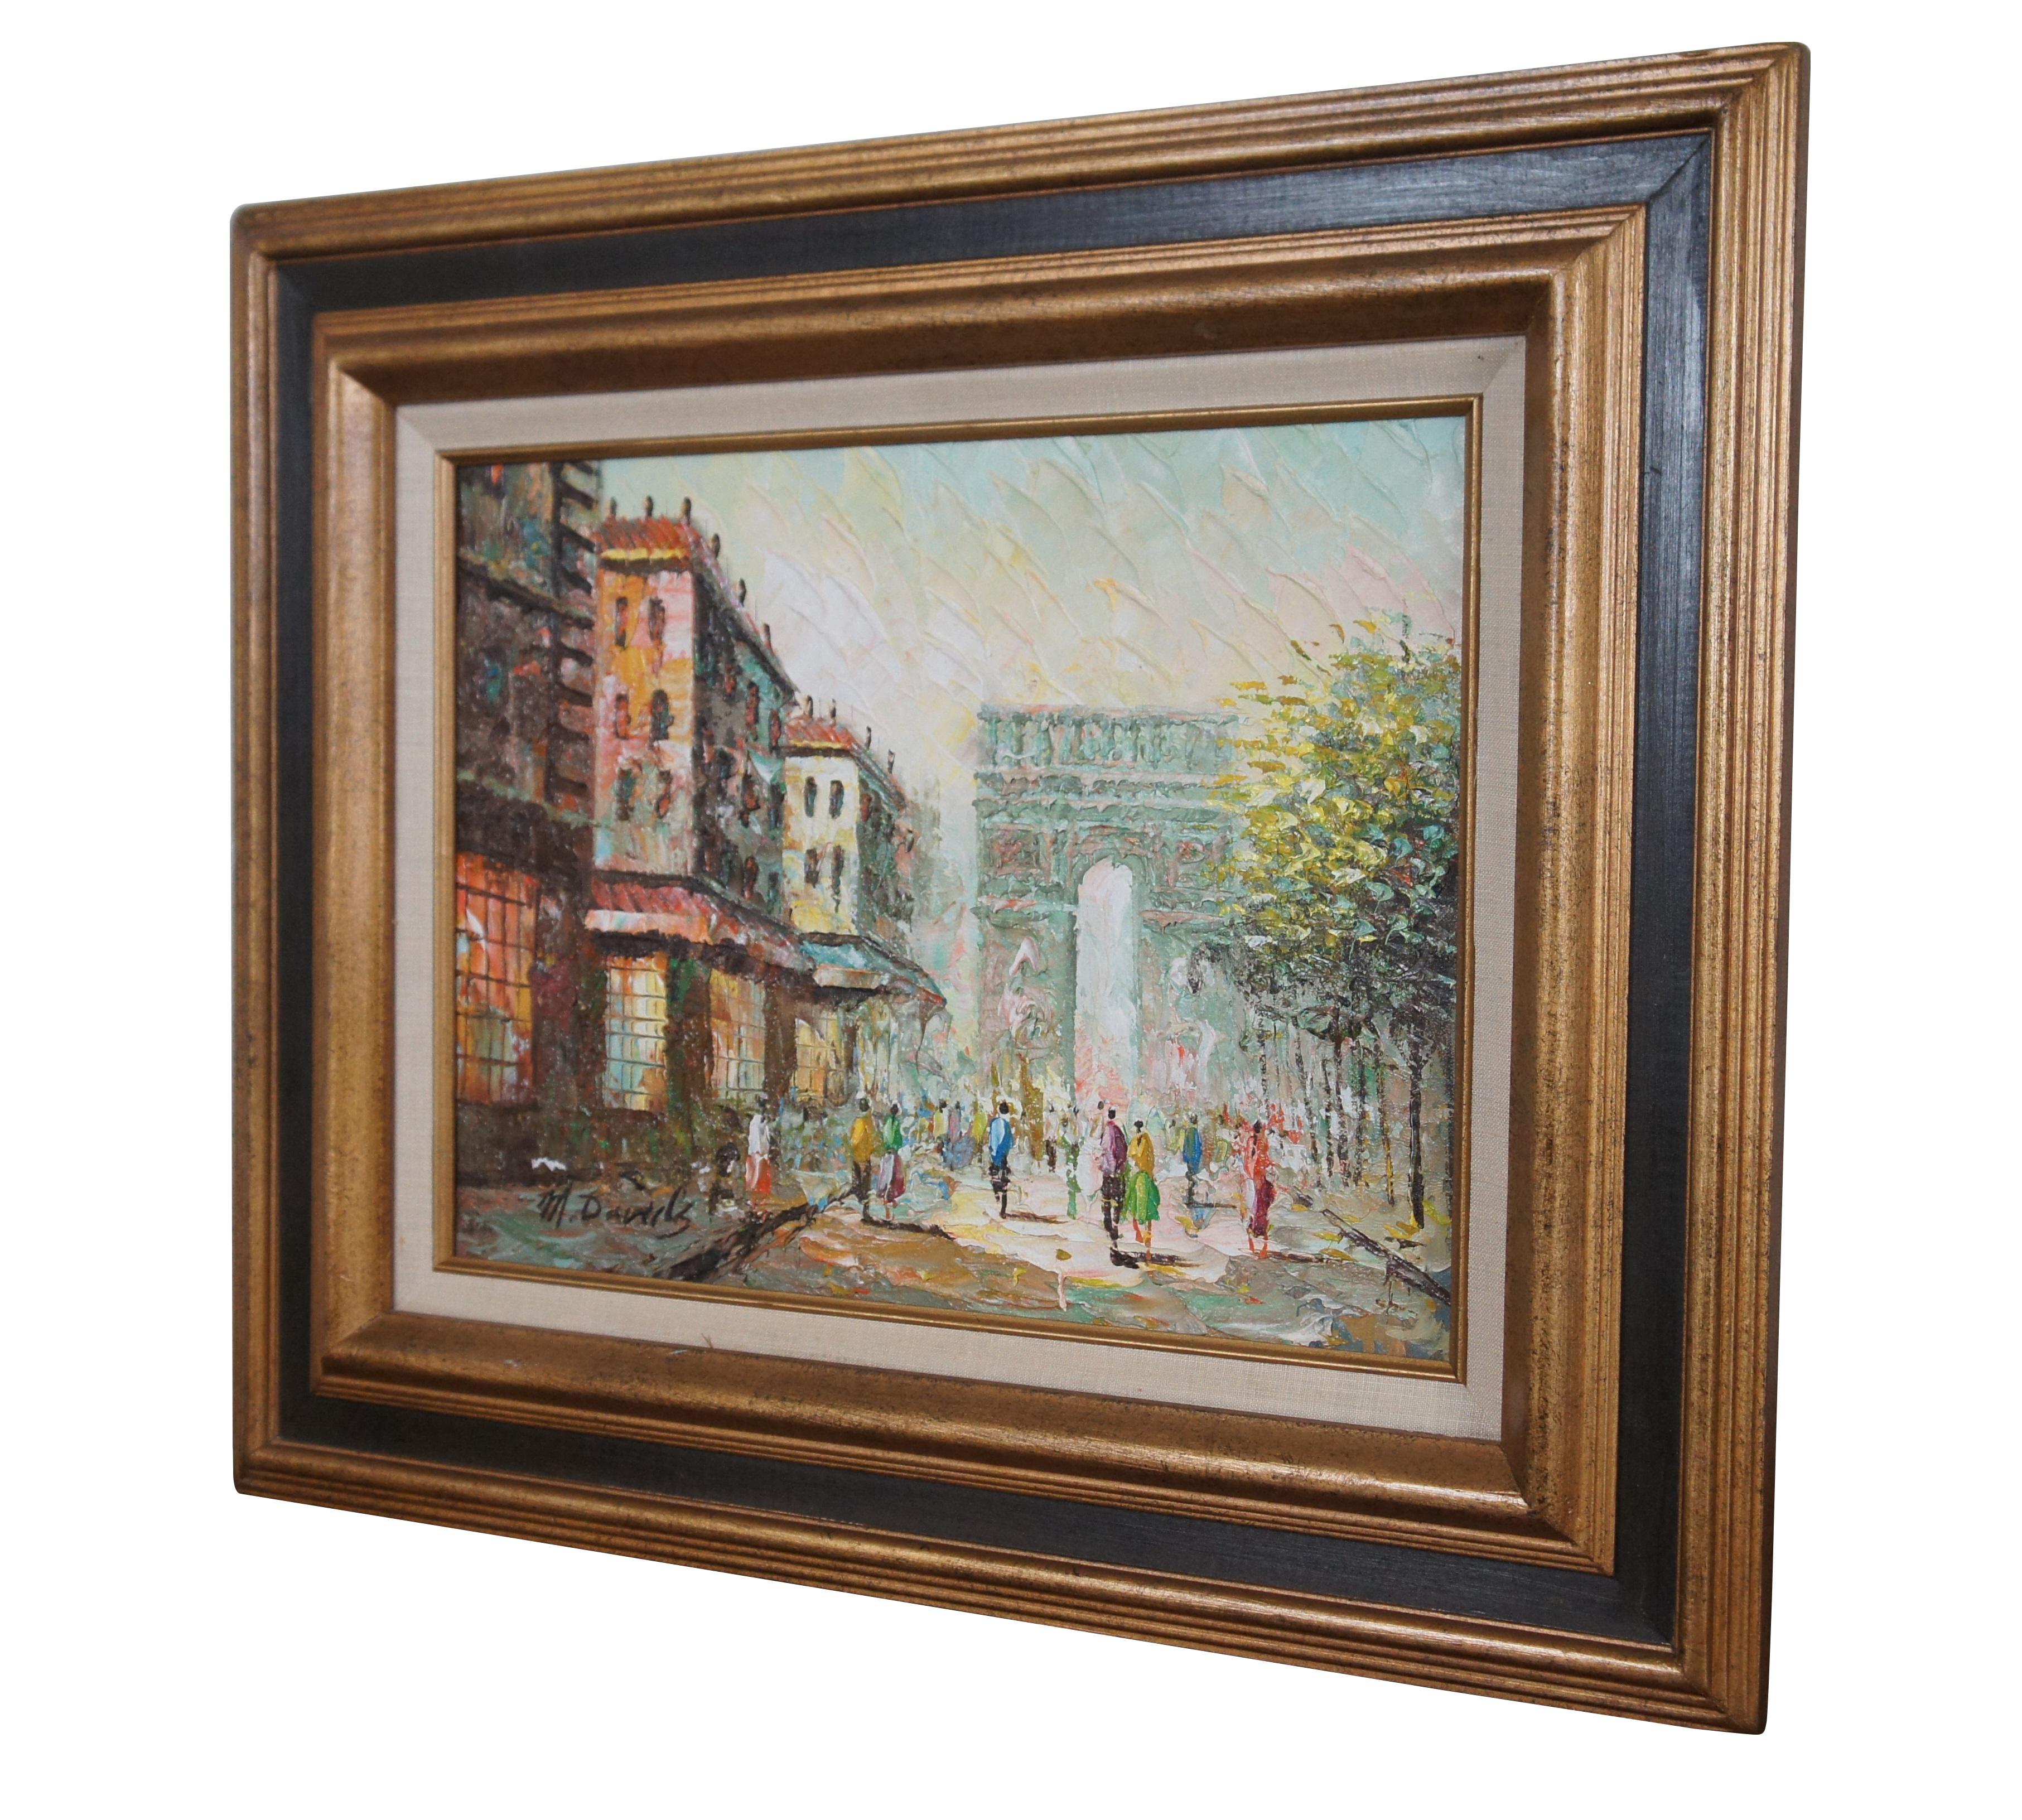 Parisian cityscape painting by M. Davids.  An oil on canvas by the Arc de Triomphe in Paris.  Beautifully painted with exceptional colors.  Hand Signed lower left.

Dimensions:
23.75